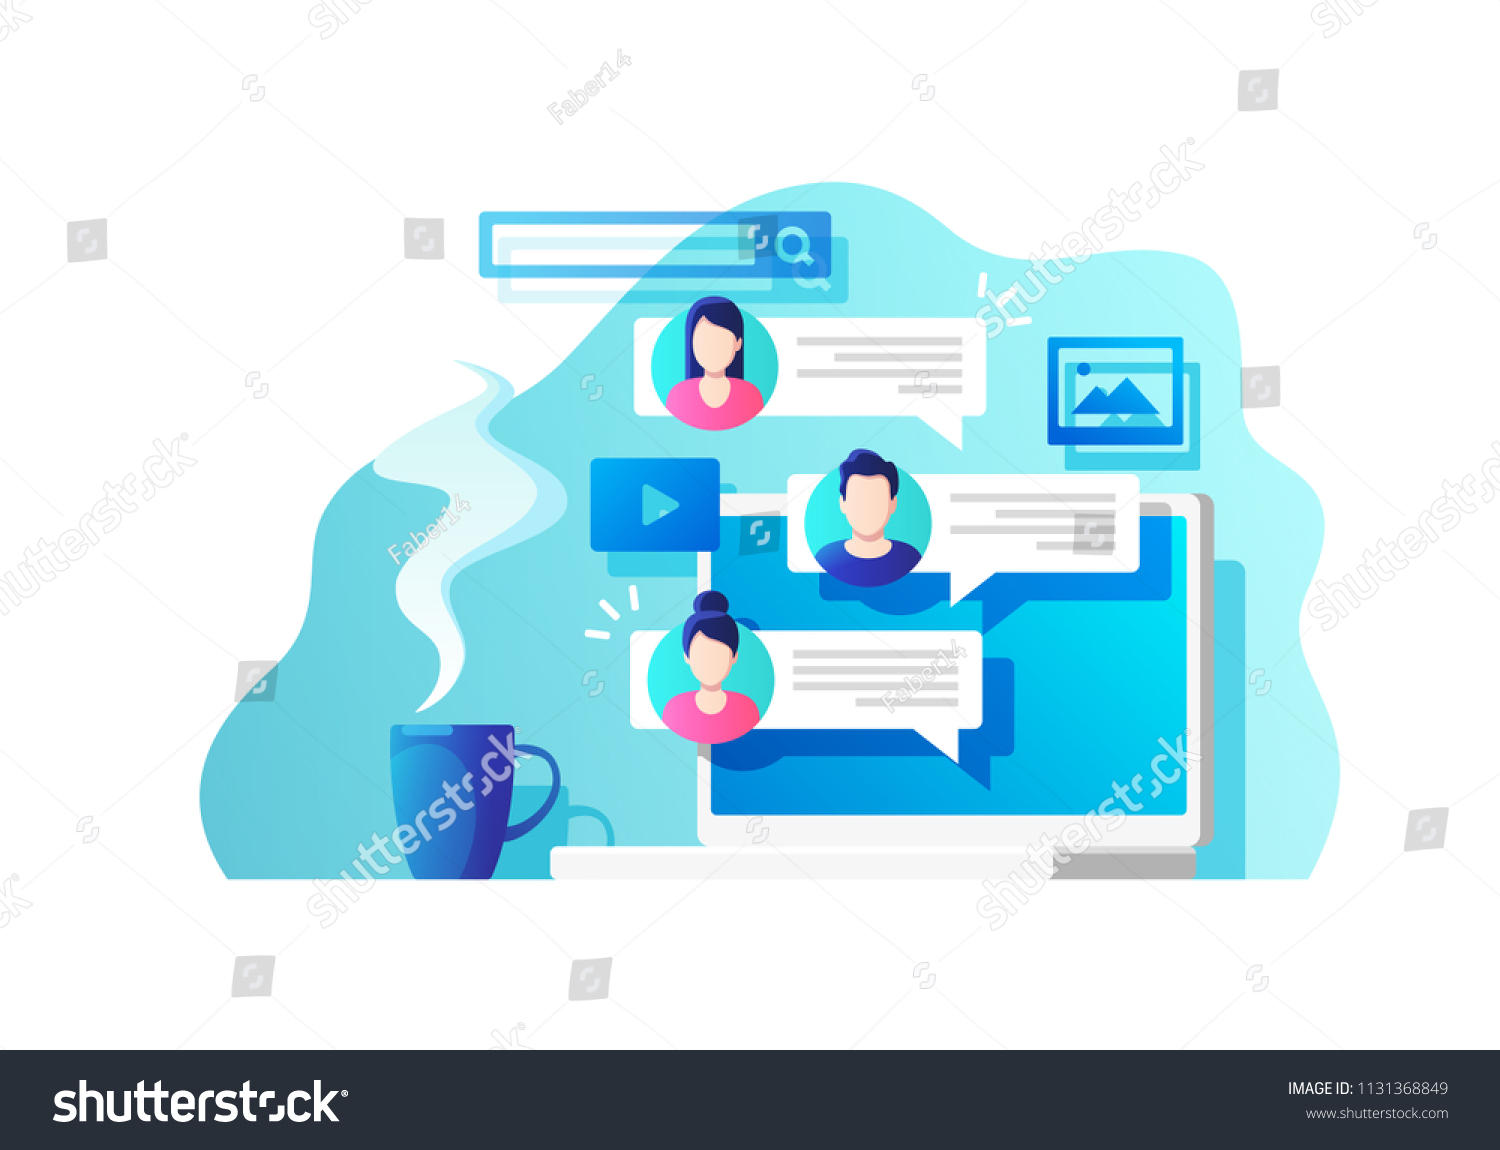 Communication, dialog, conversation on an online forum and internet chatting concept. Vector illustration. #1131368849